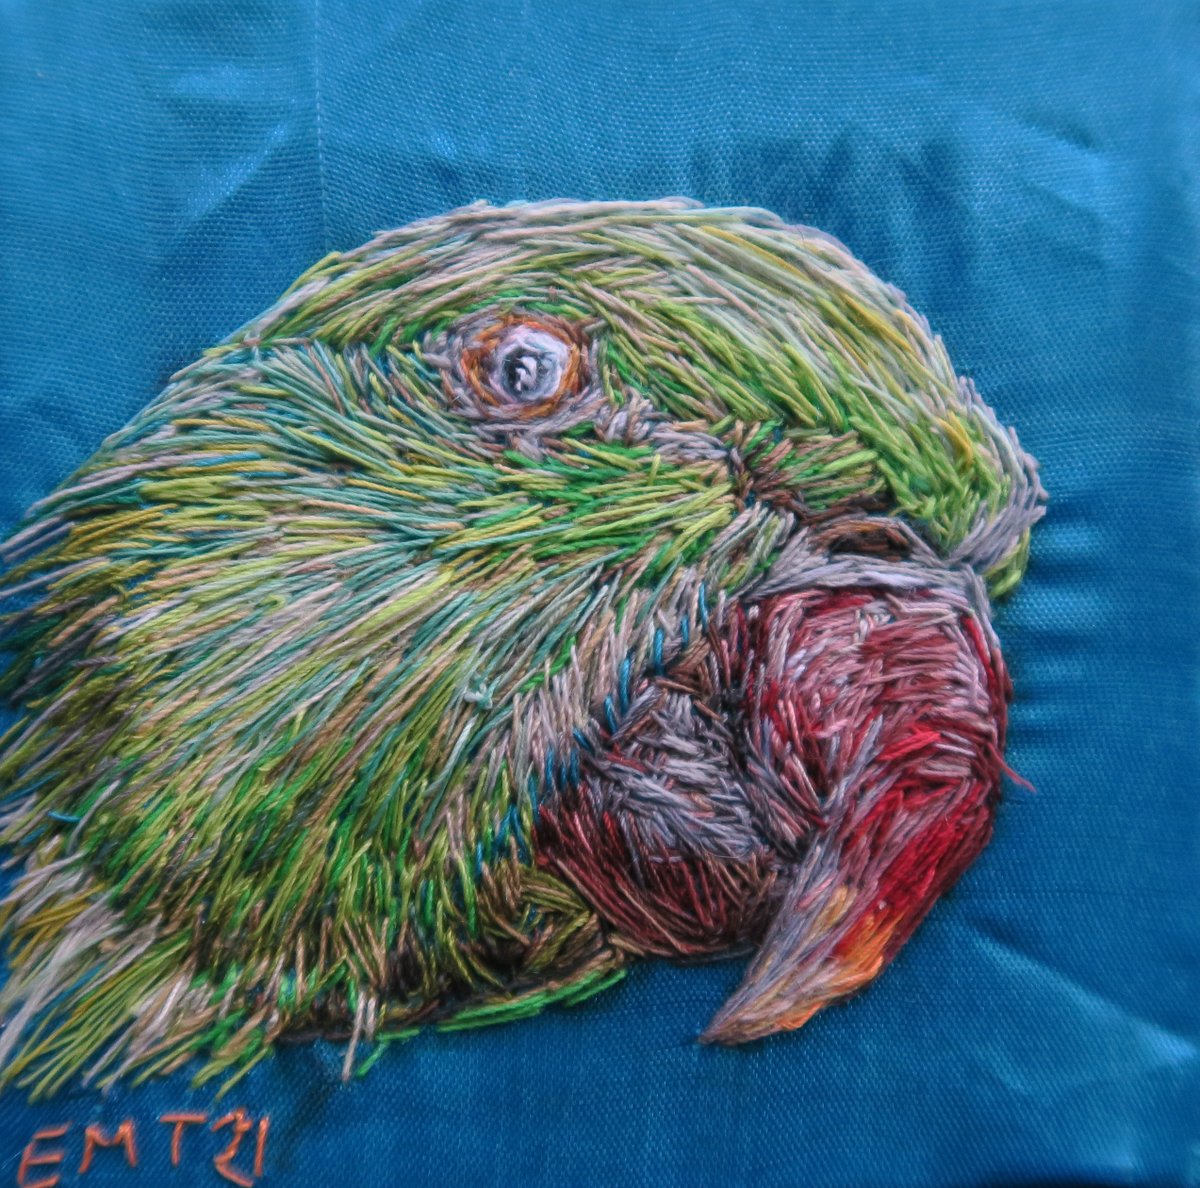 Today's #MHHSBD word challenge is green,
'Parakeet'
thread painting - hand embroidery artwork